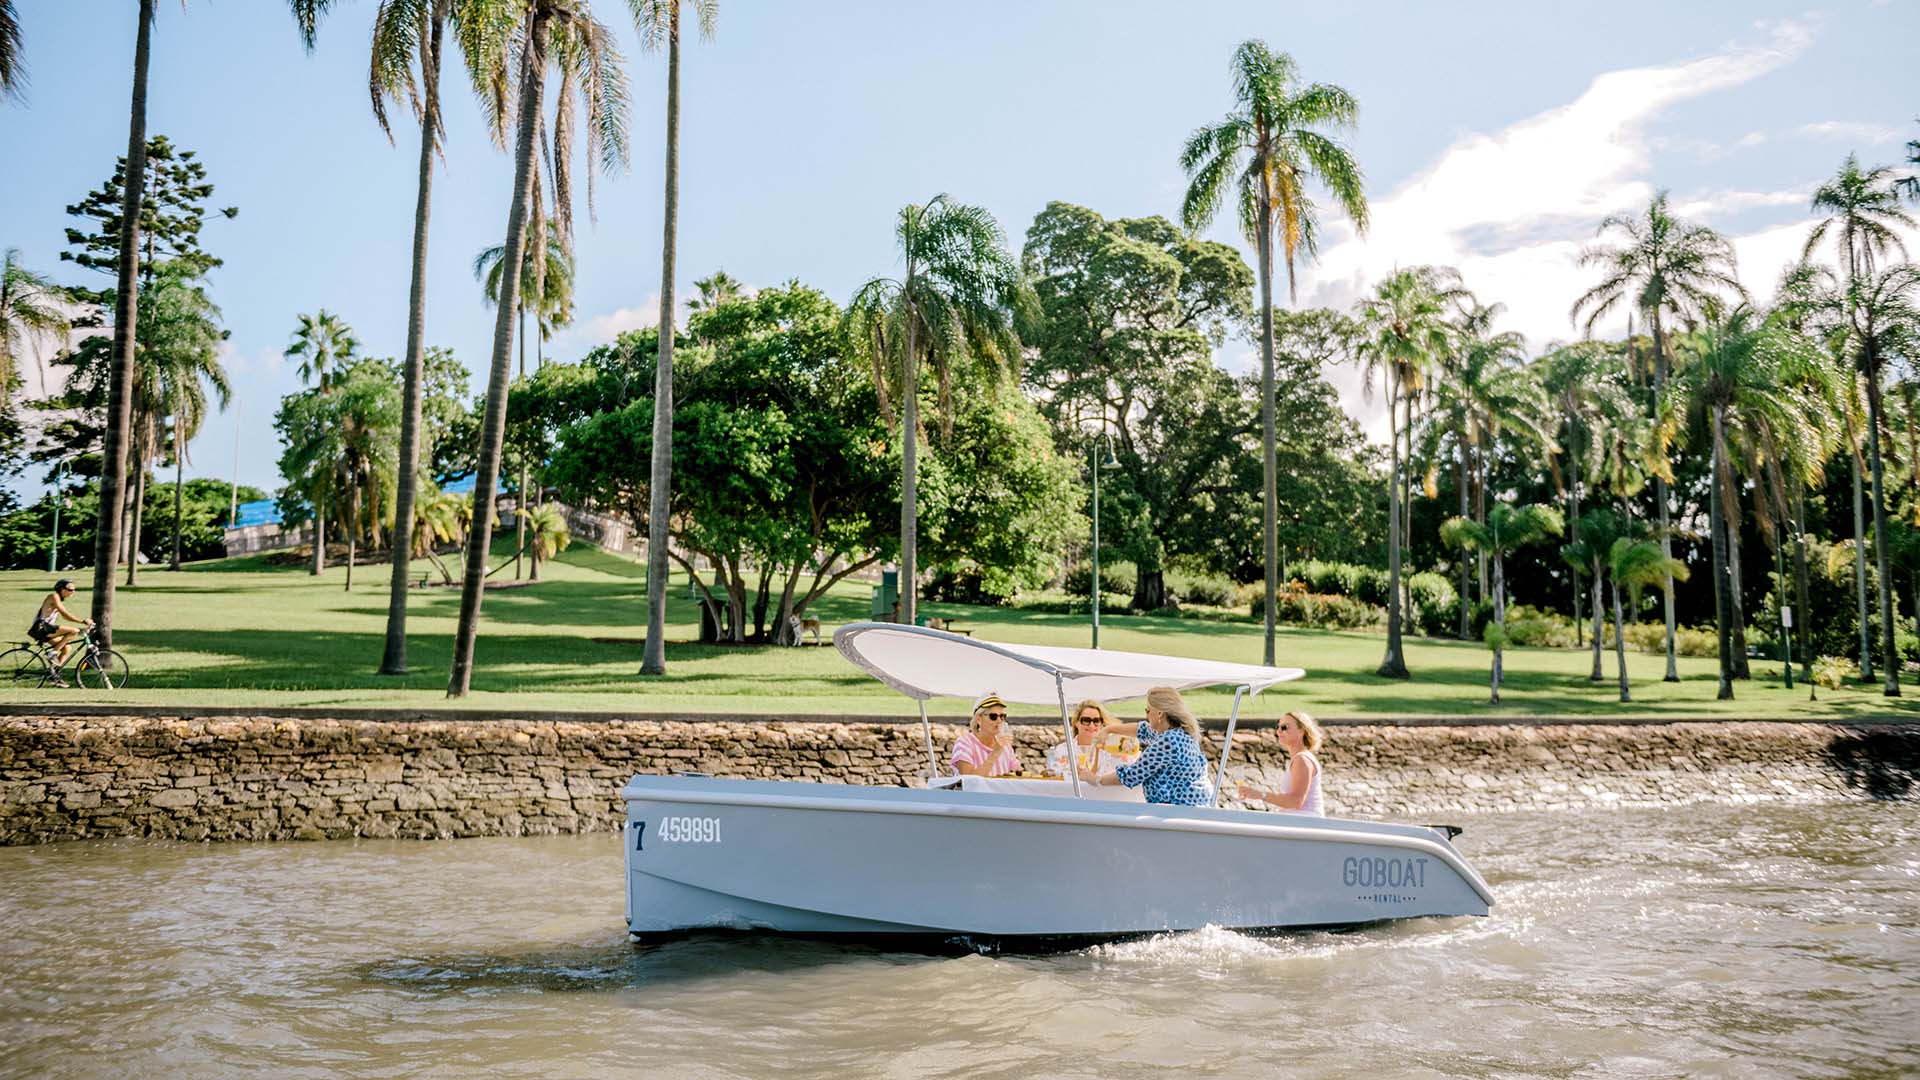 Brisbane's Pet-Friendly BYO Picnic Boats Are Available to Book for River Cruises Once Again